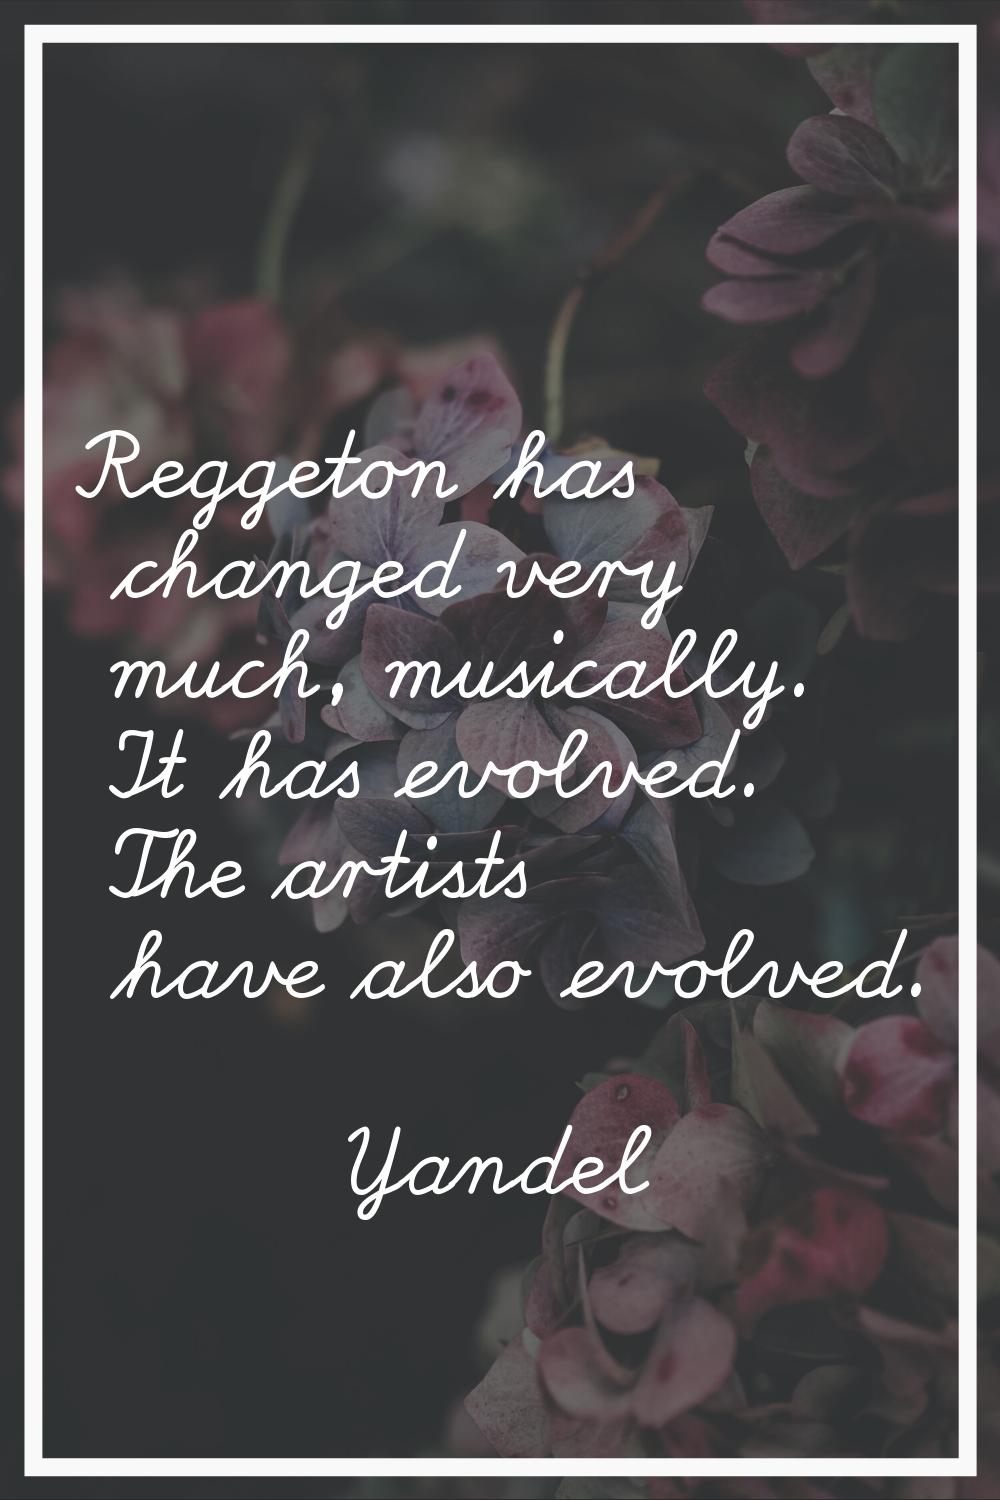 Reggeton has changed very much, musically. It has evolved. The artists have also evolved.